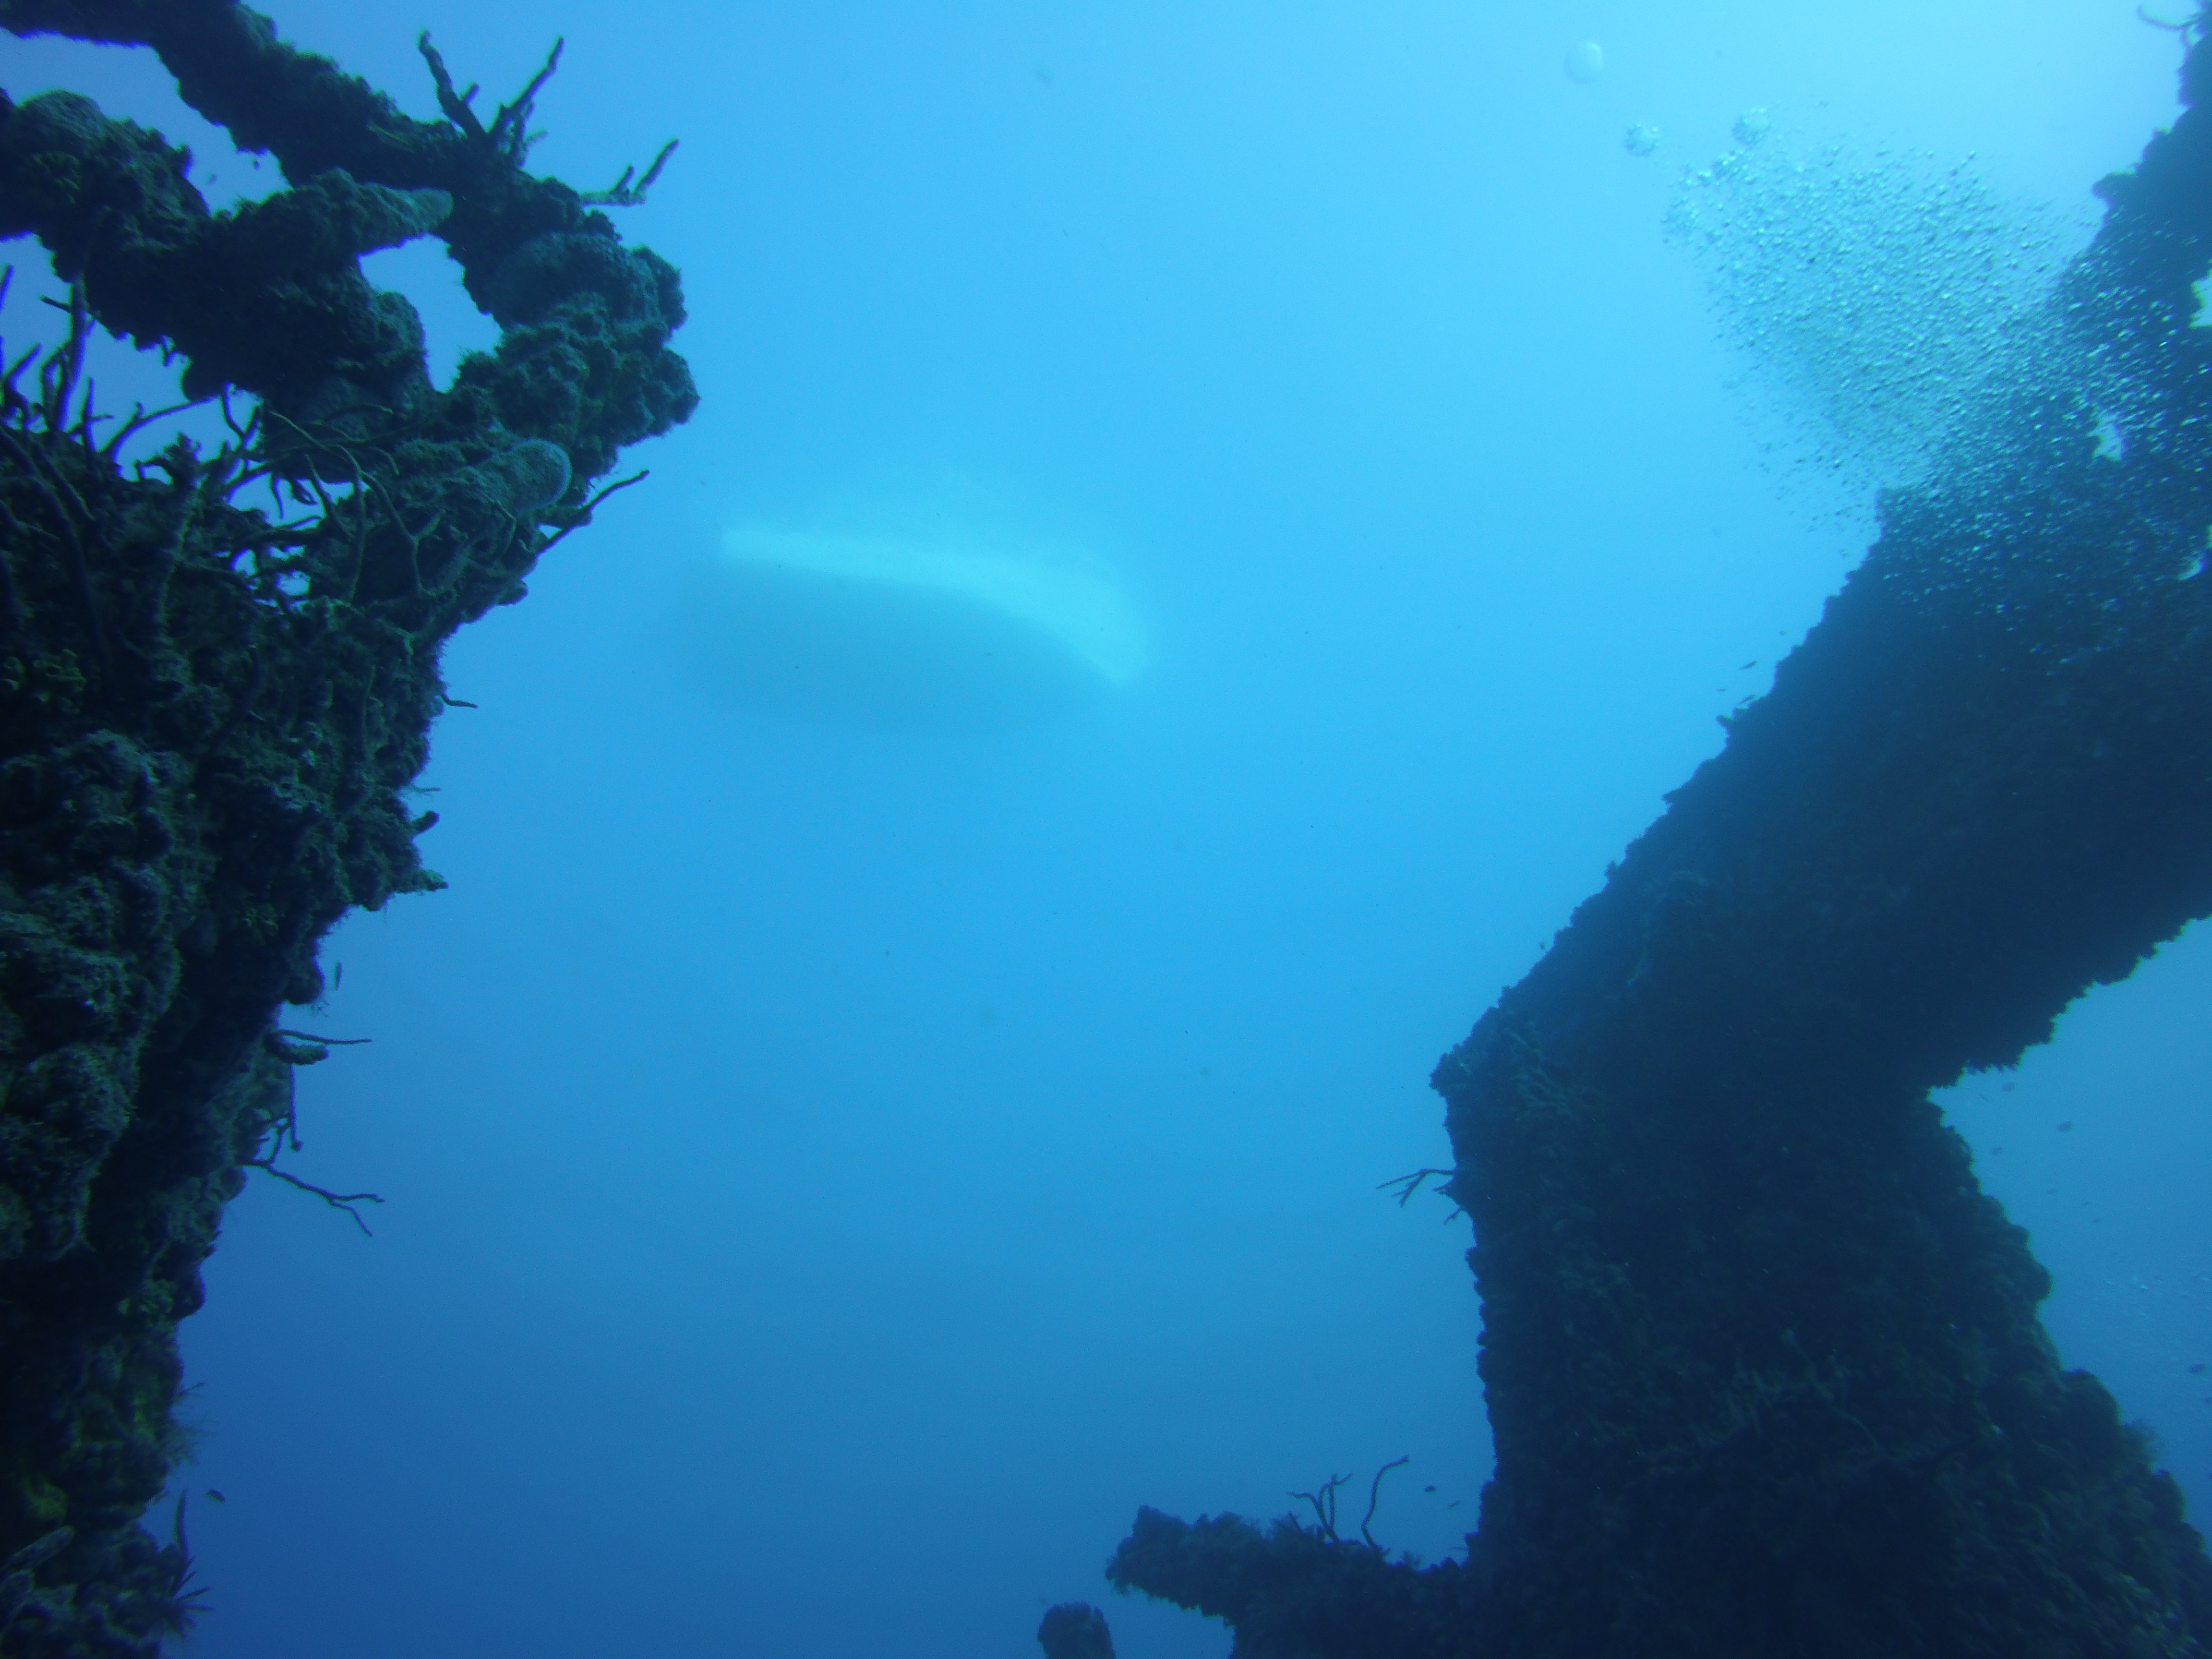 Underwater on the Spiegel Grove wreck showing Island Venture boat on the surface